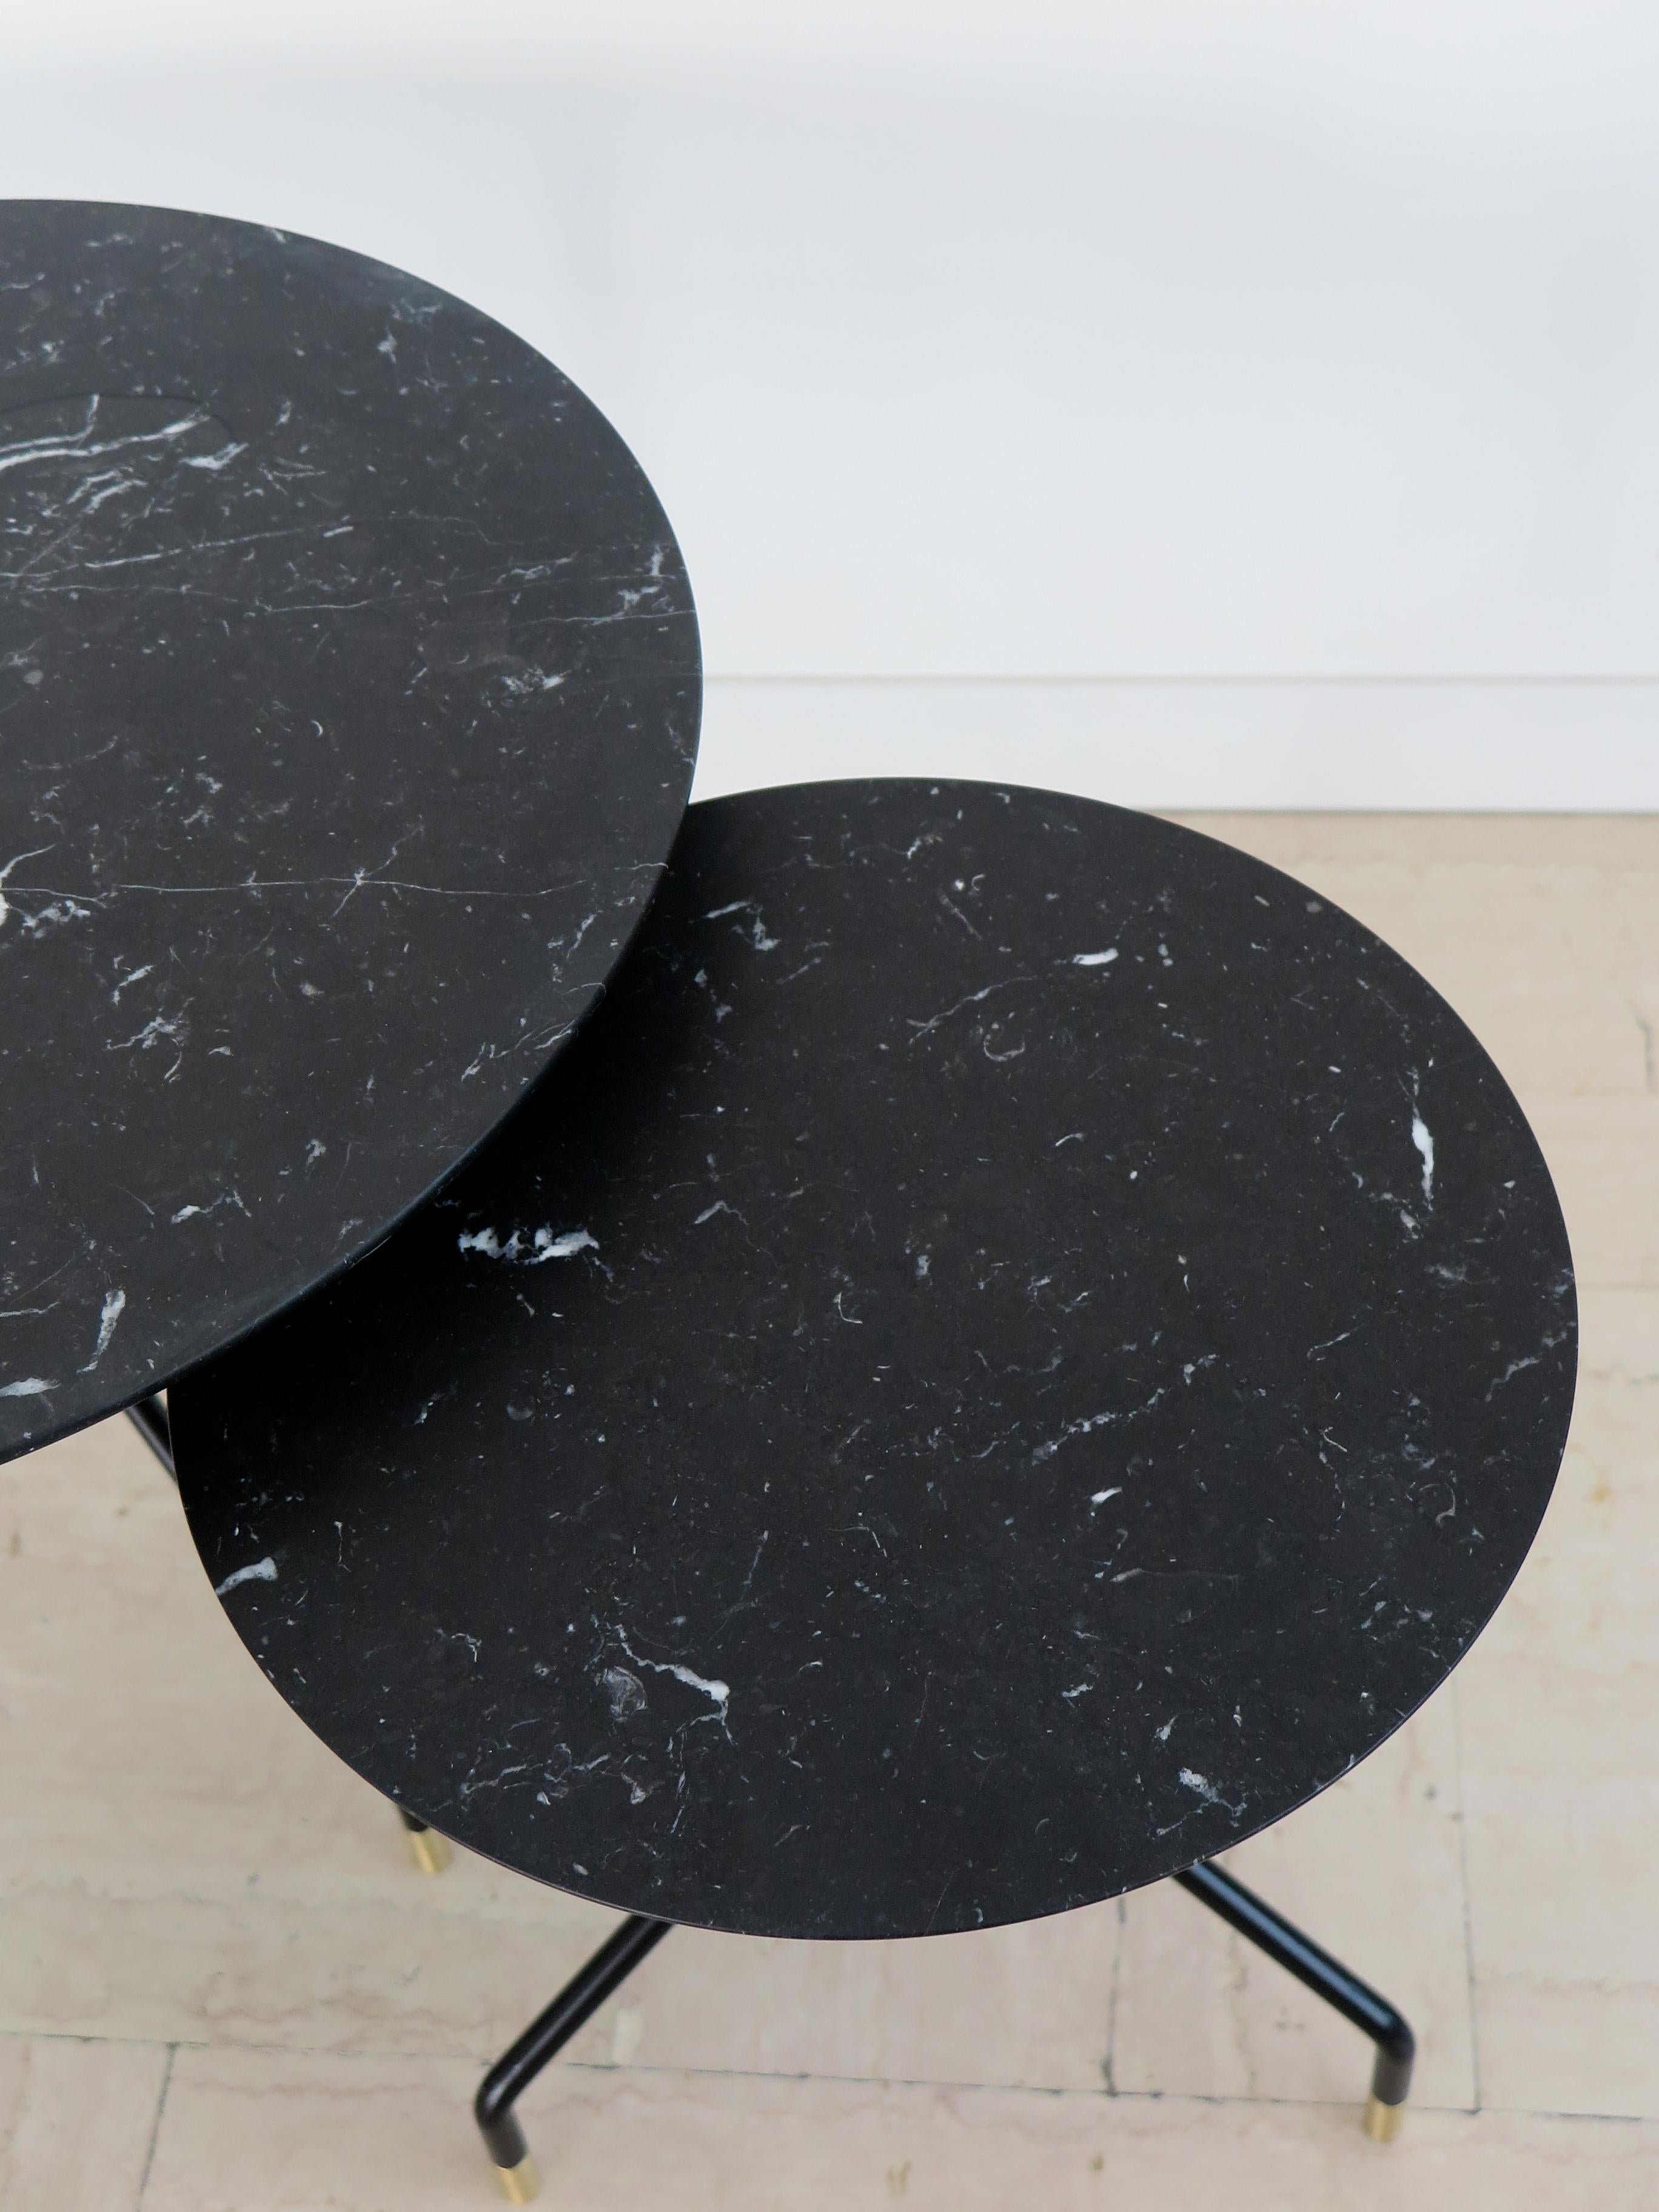 Varnished Italian Contemporary Black Marble Coffee Tables Set New Design Capperidicasa For Sale